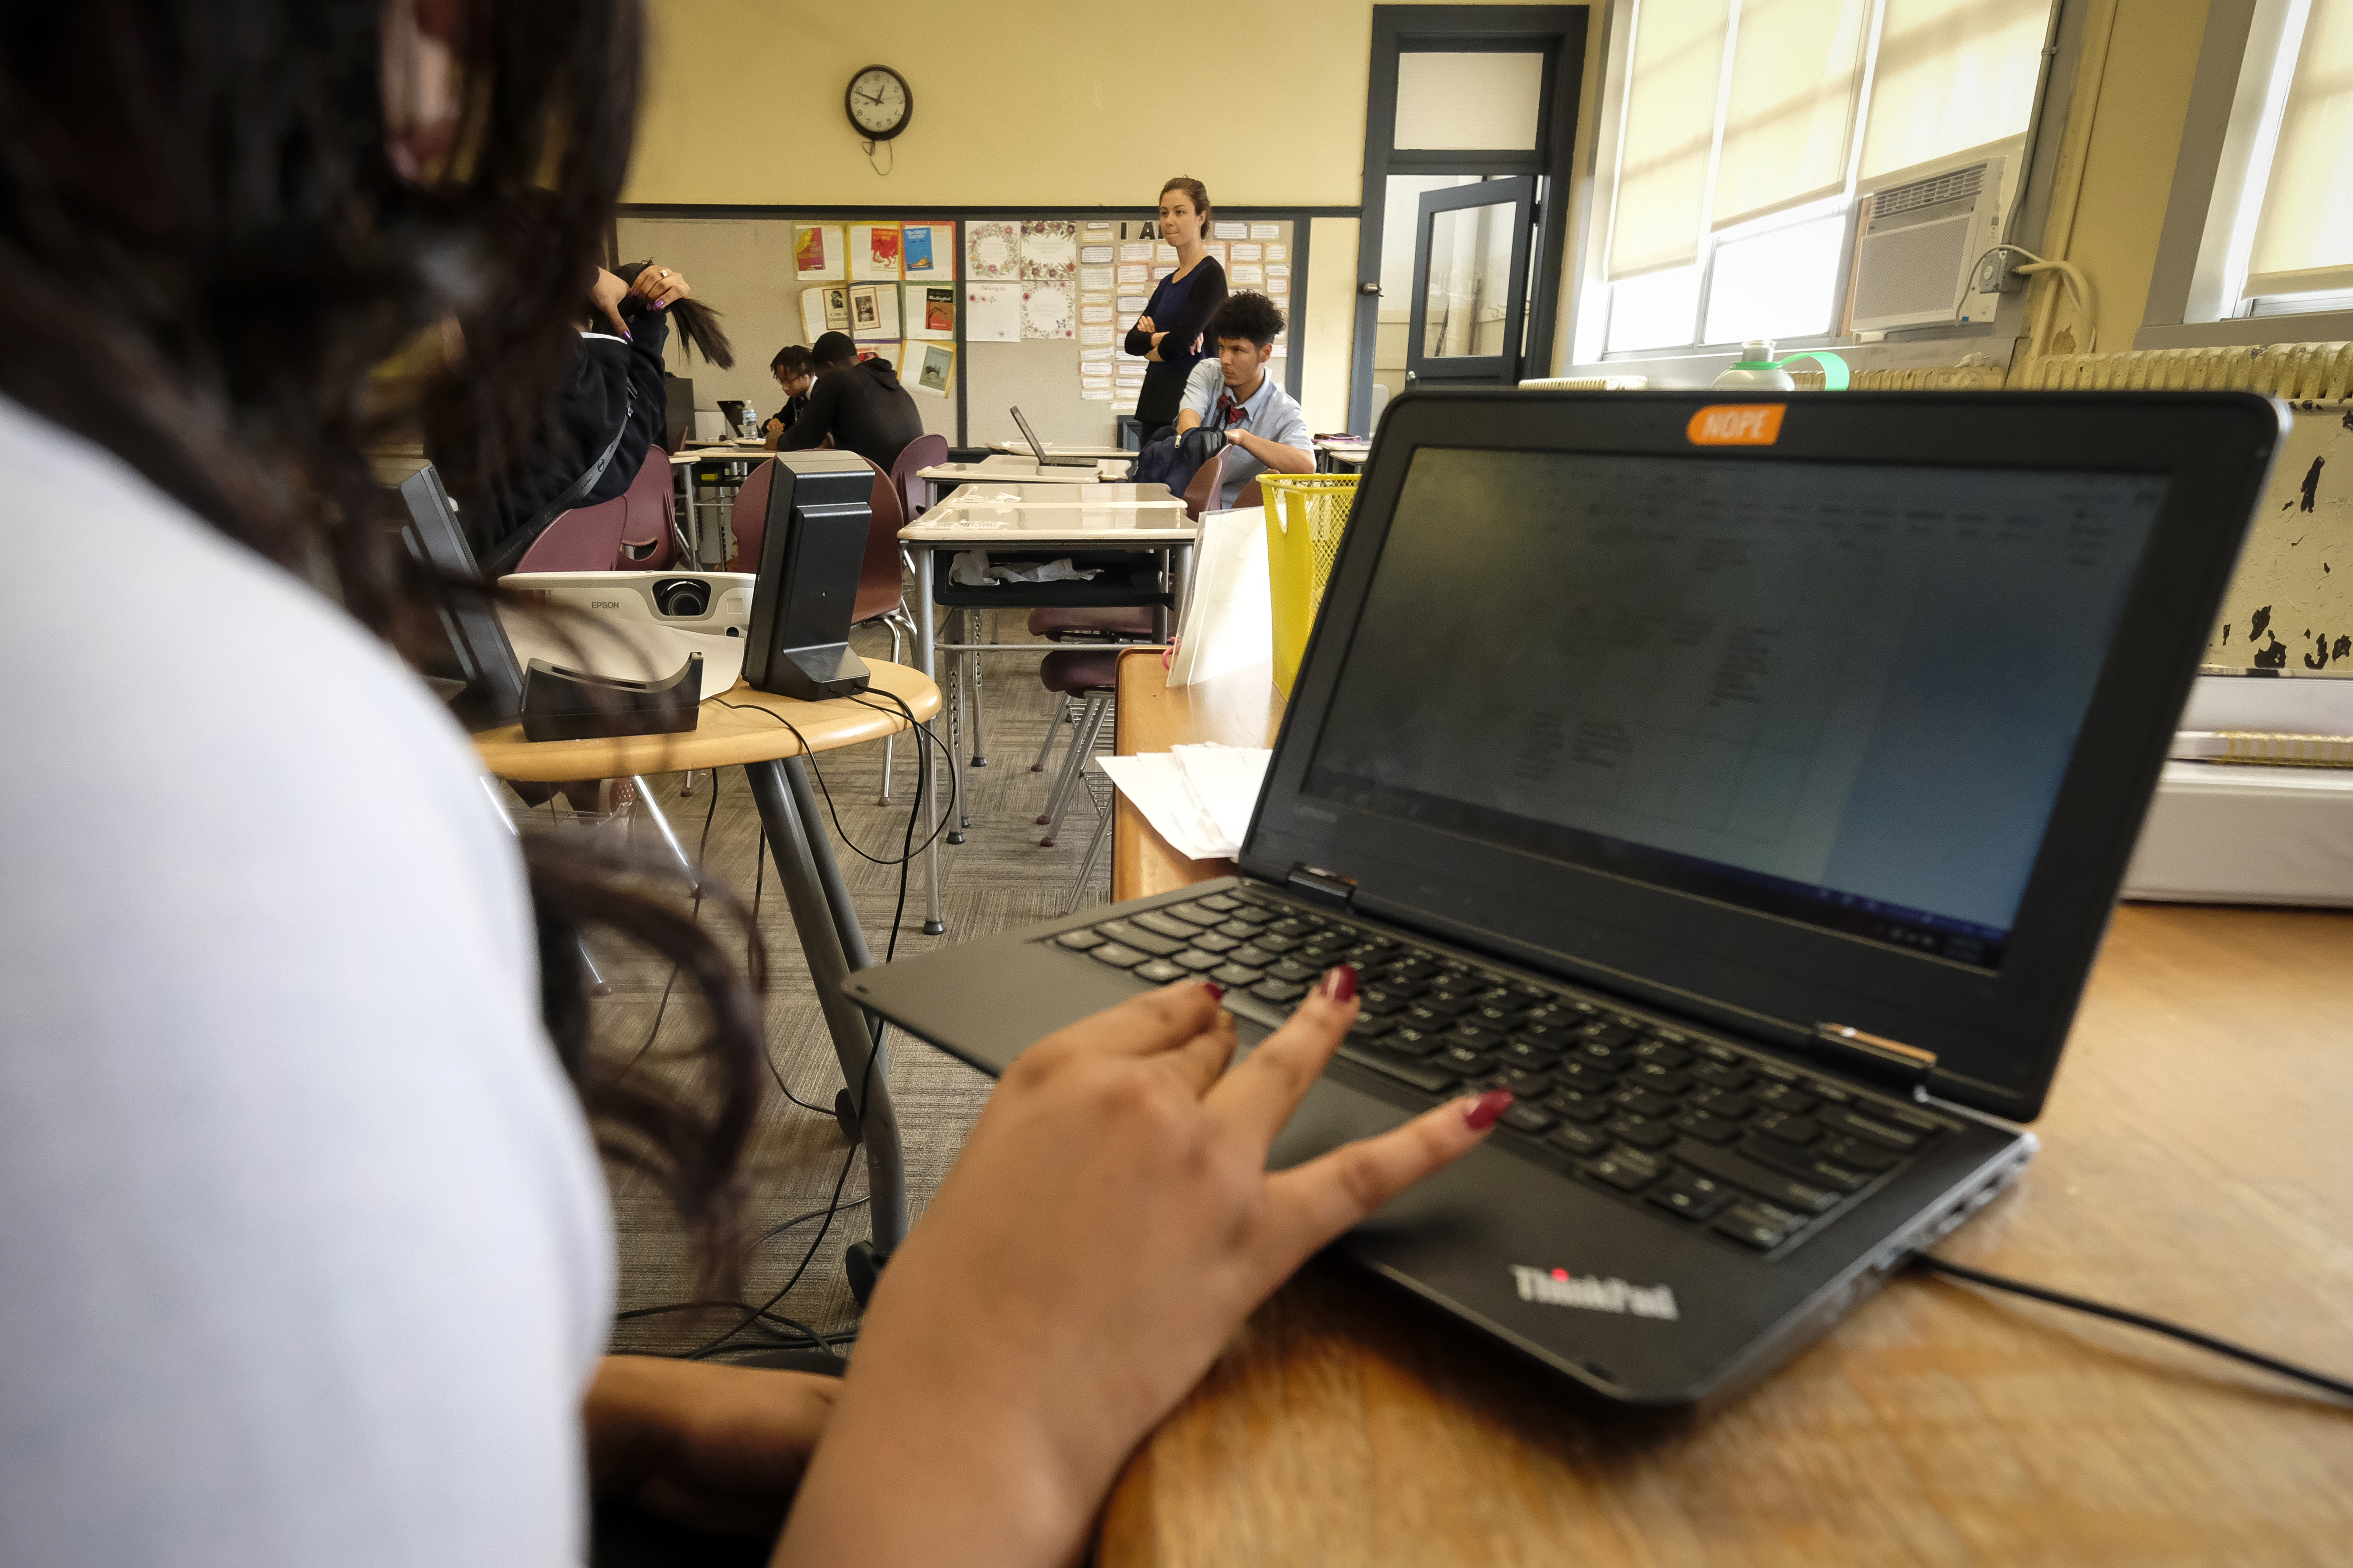 A student in a classroom uses a laptop computer at a private high school in Indianapolis, Indiana.